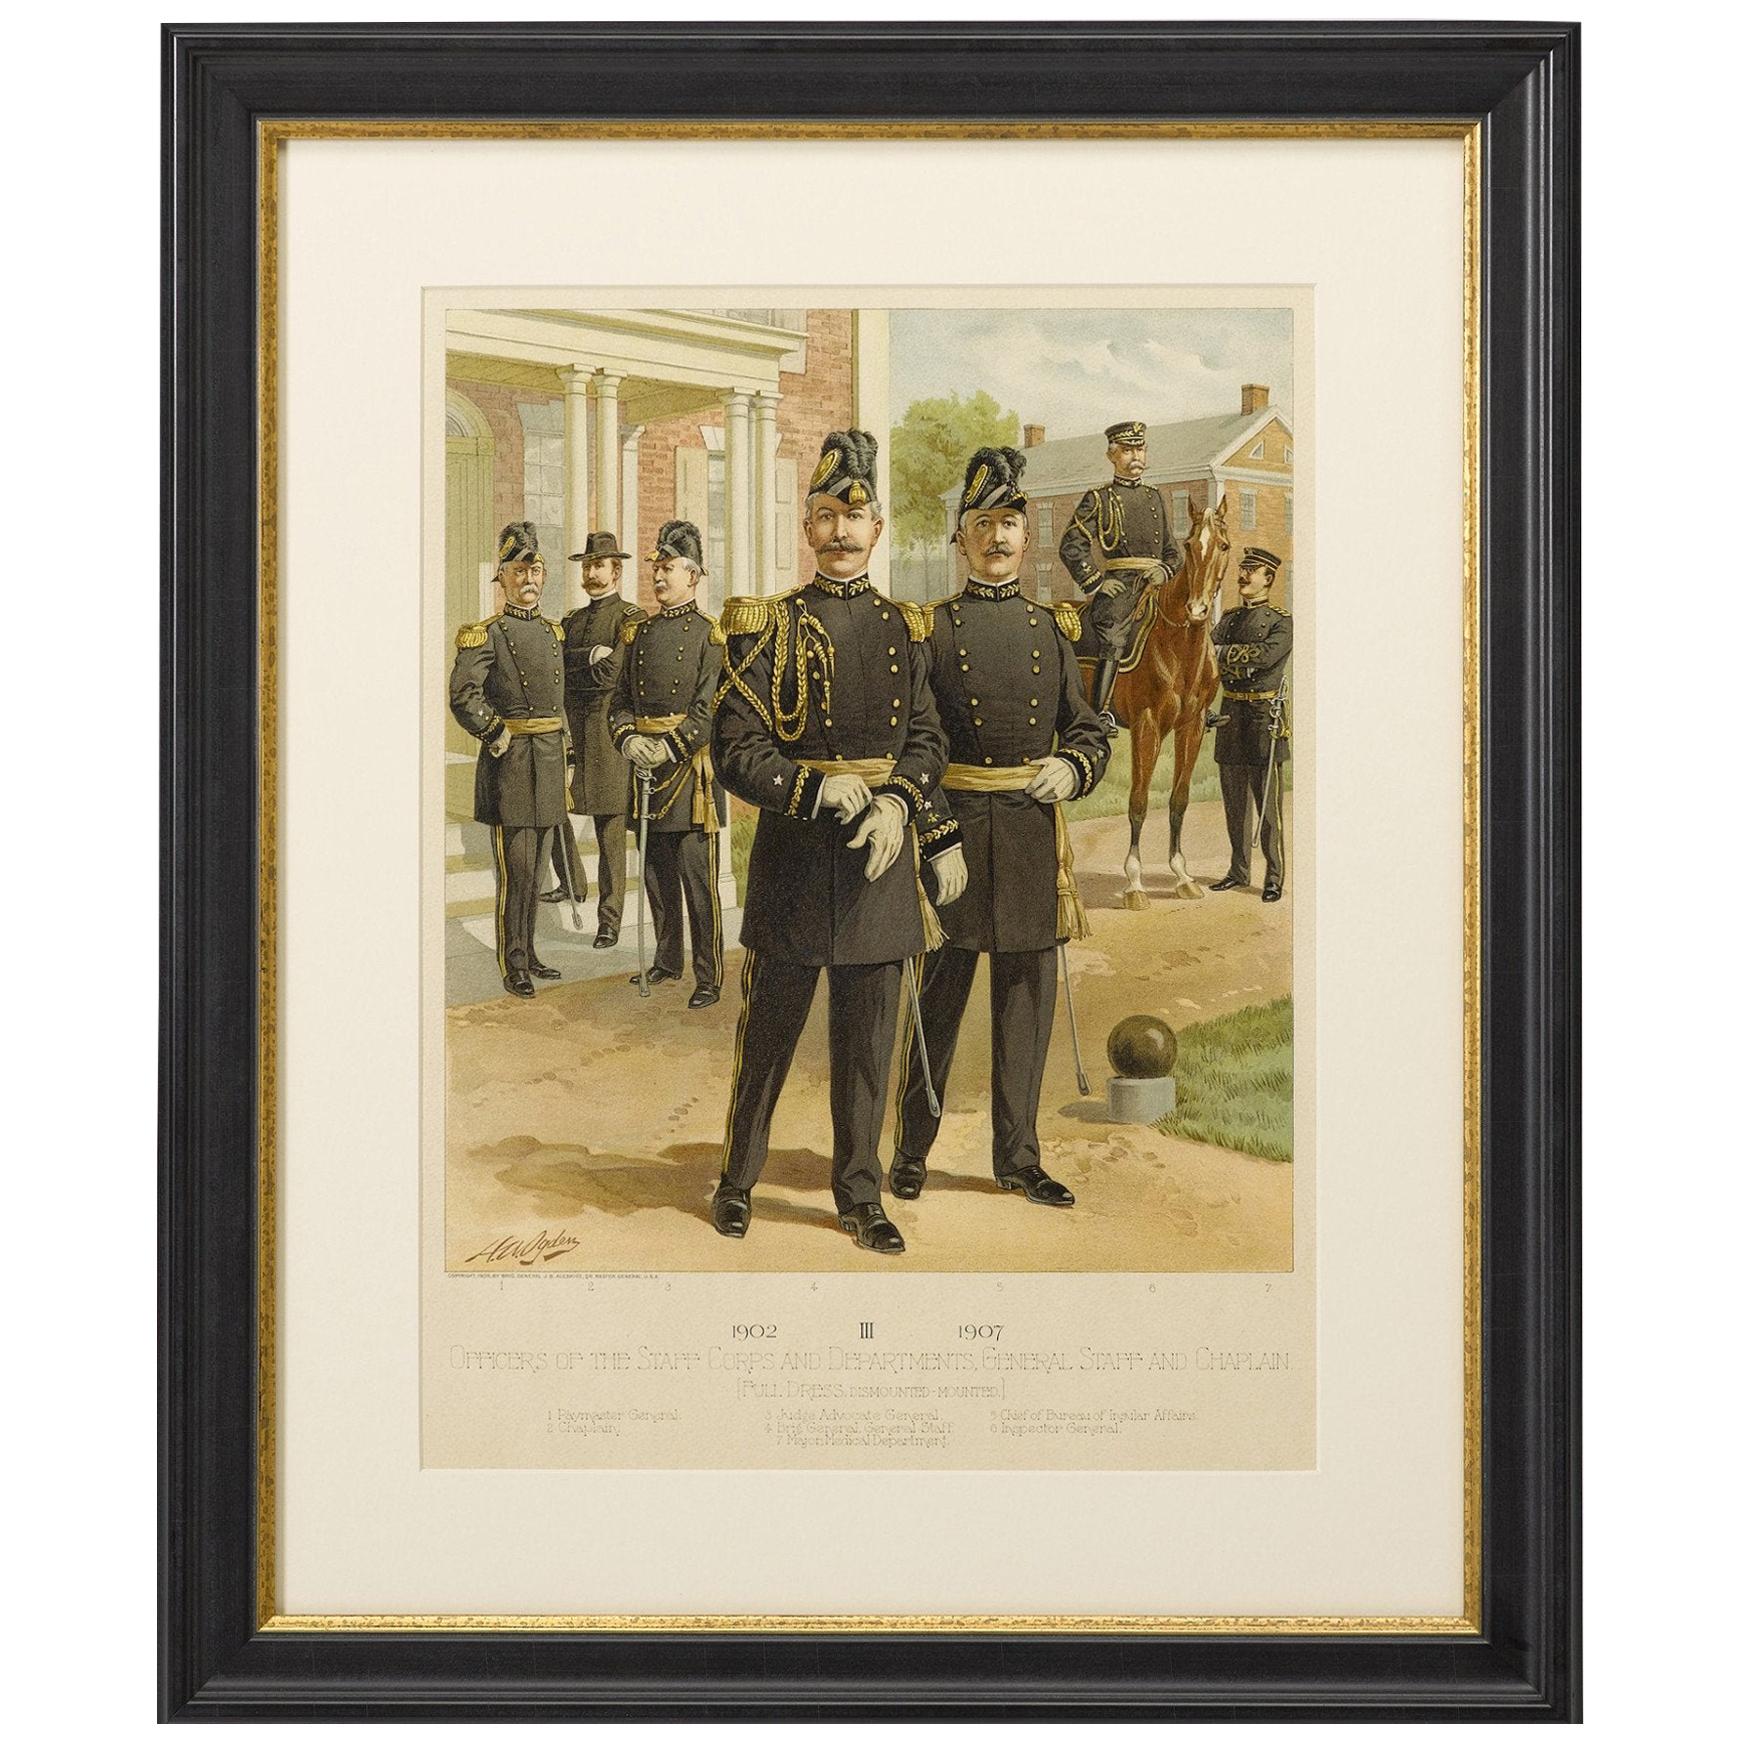 Original "1902-1907 Officers of the Staff Corps" by C. Ogden, 1908